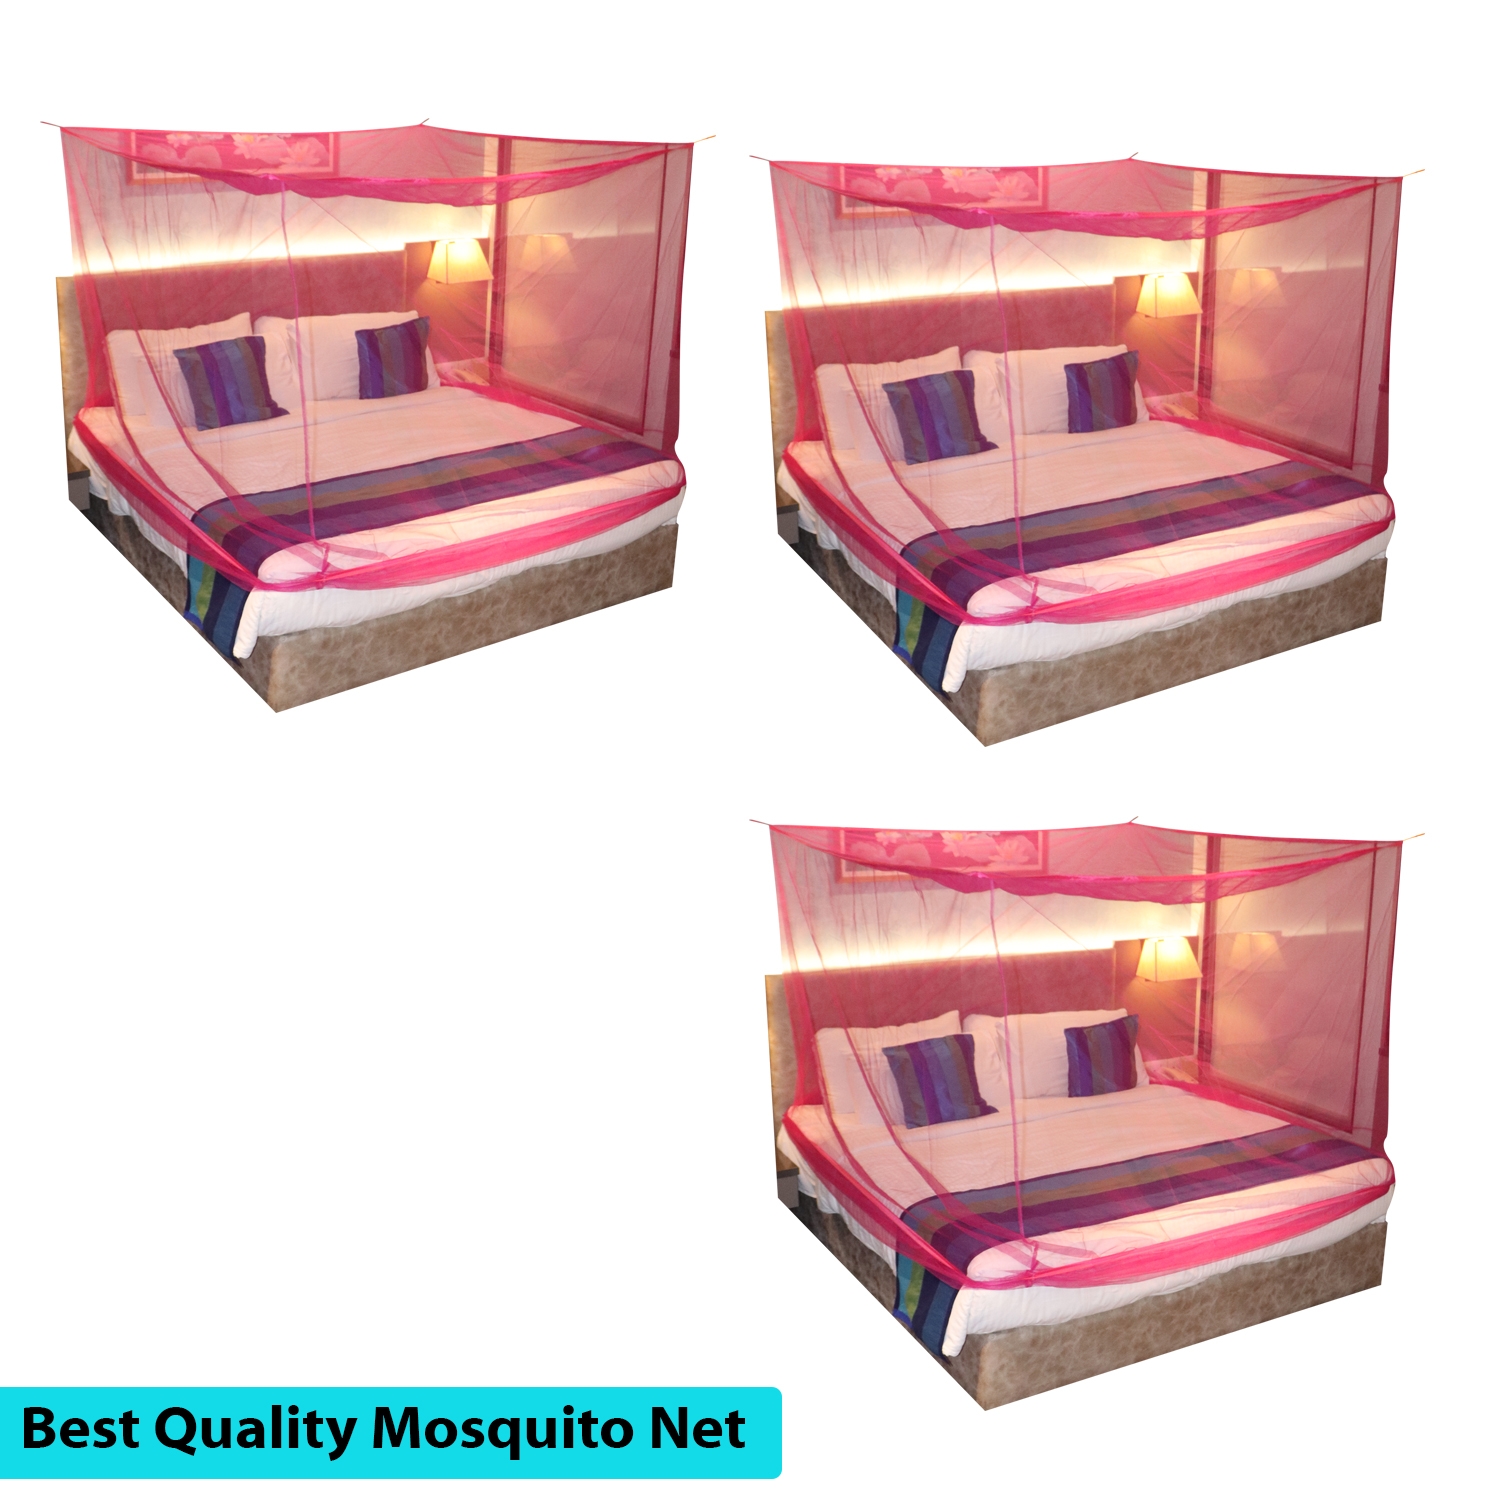 Paola Jewels | Mosquito Net for Double Bed, King-Size, Square Hanging Foldable Polyester Net Pink Pack of 3